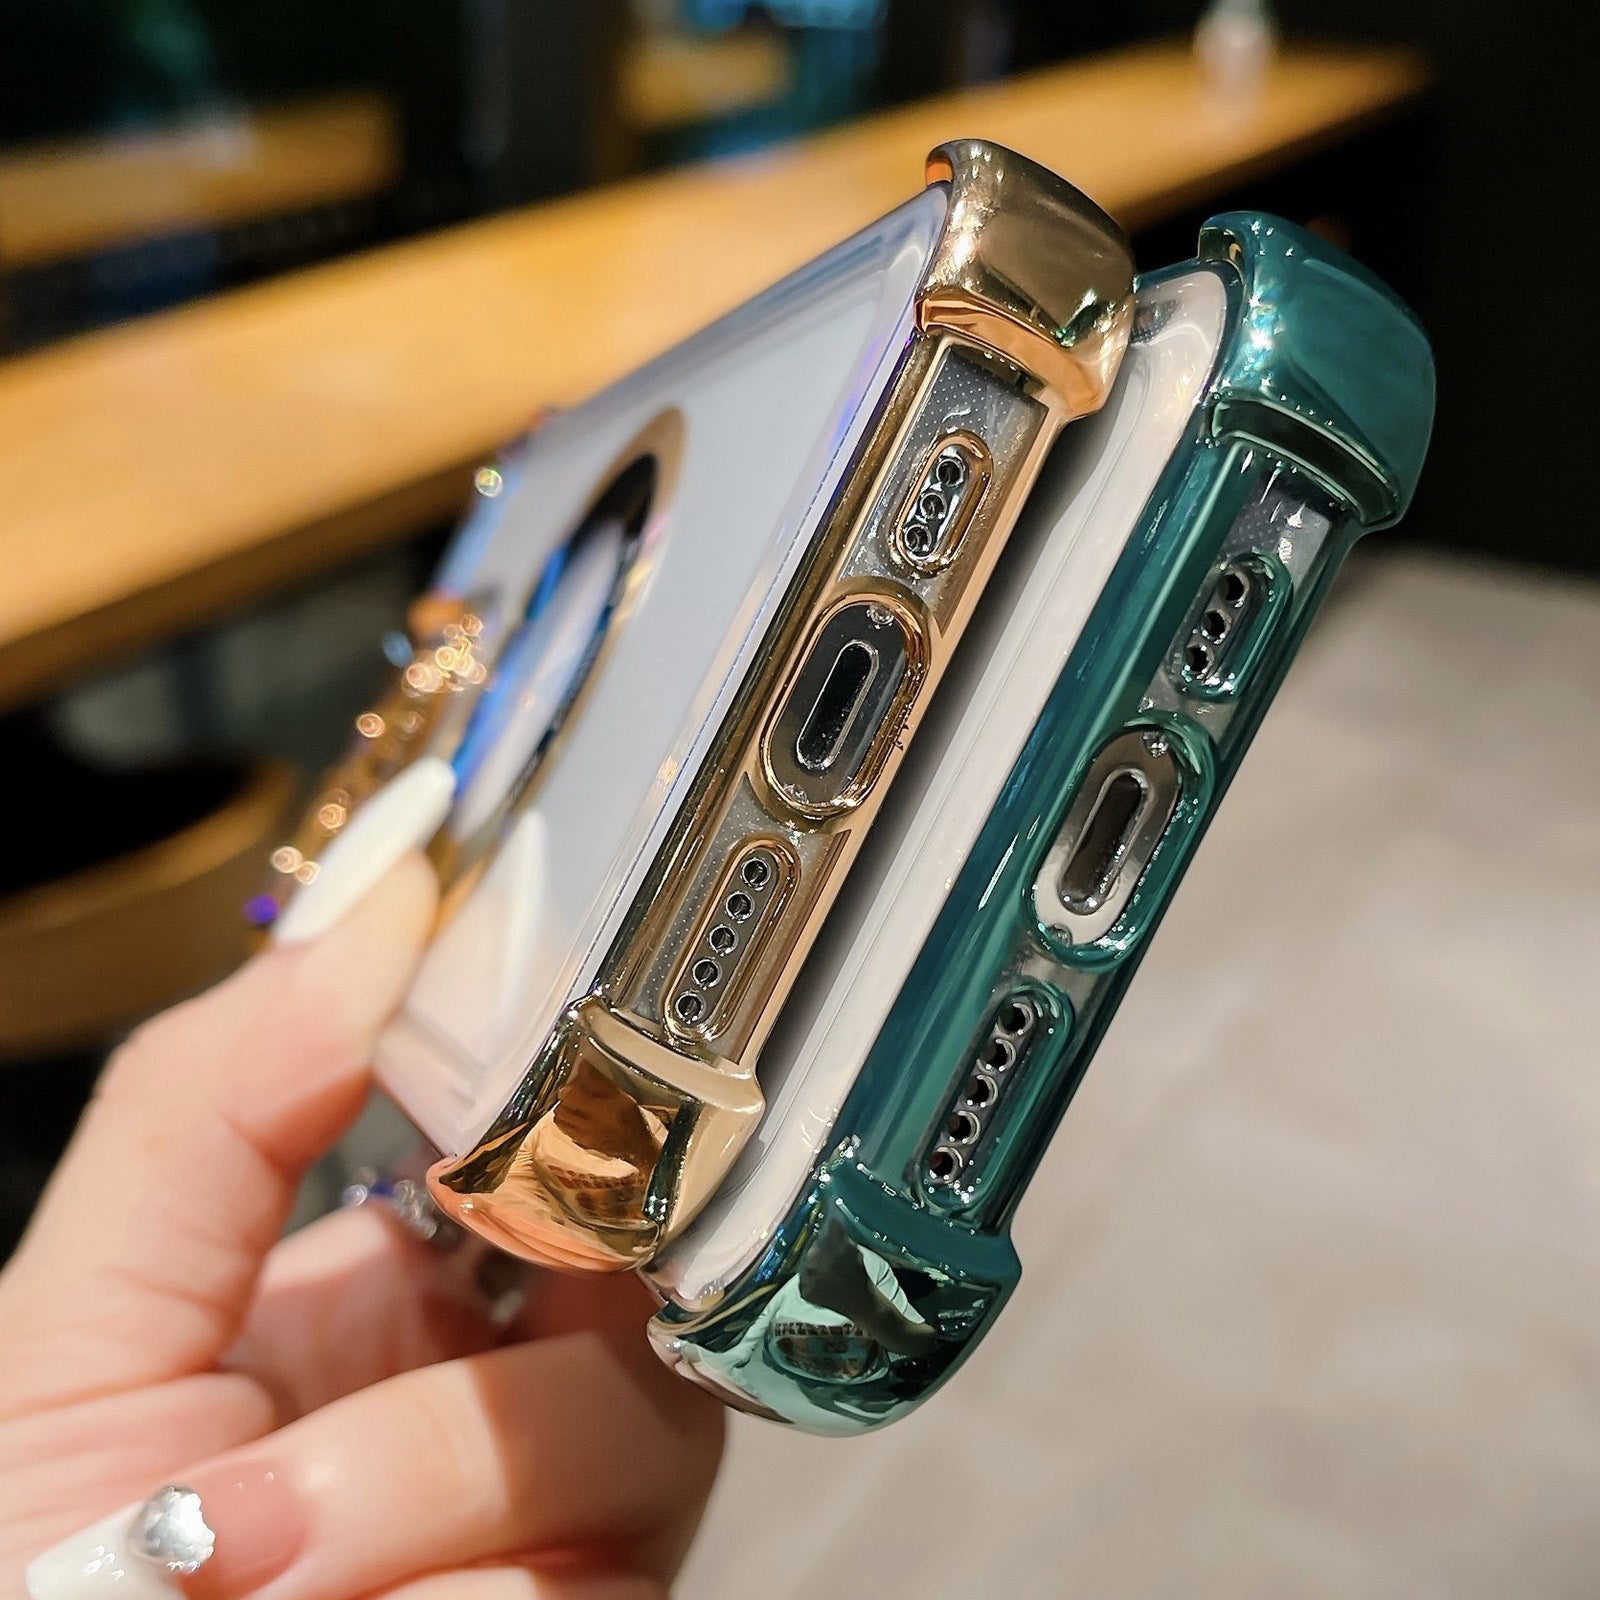 Stylish Transparent MagSafe Case with Camera Lens Protection and Electroplated Edges for iPhone